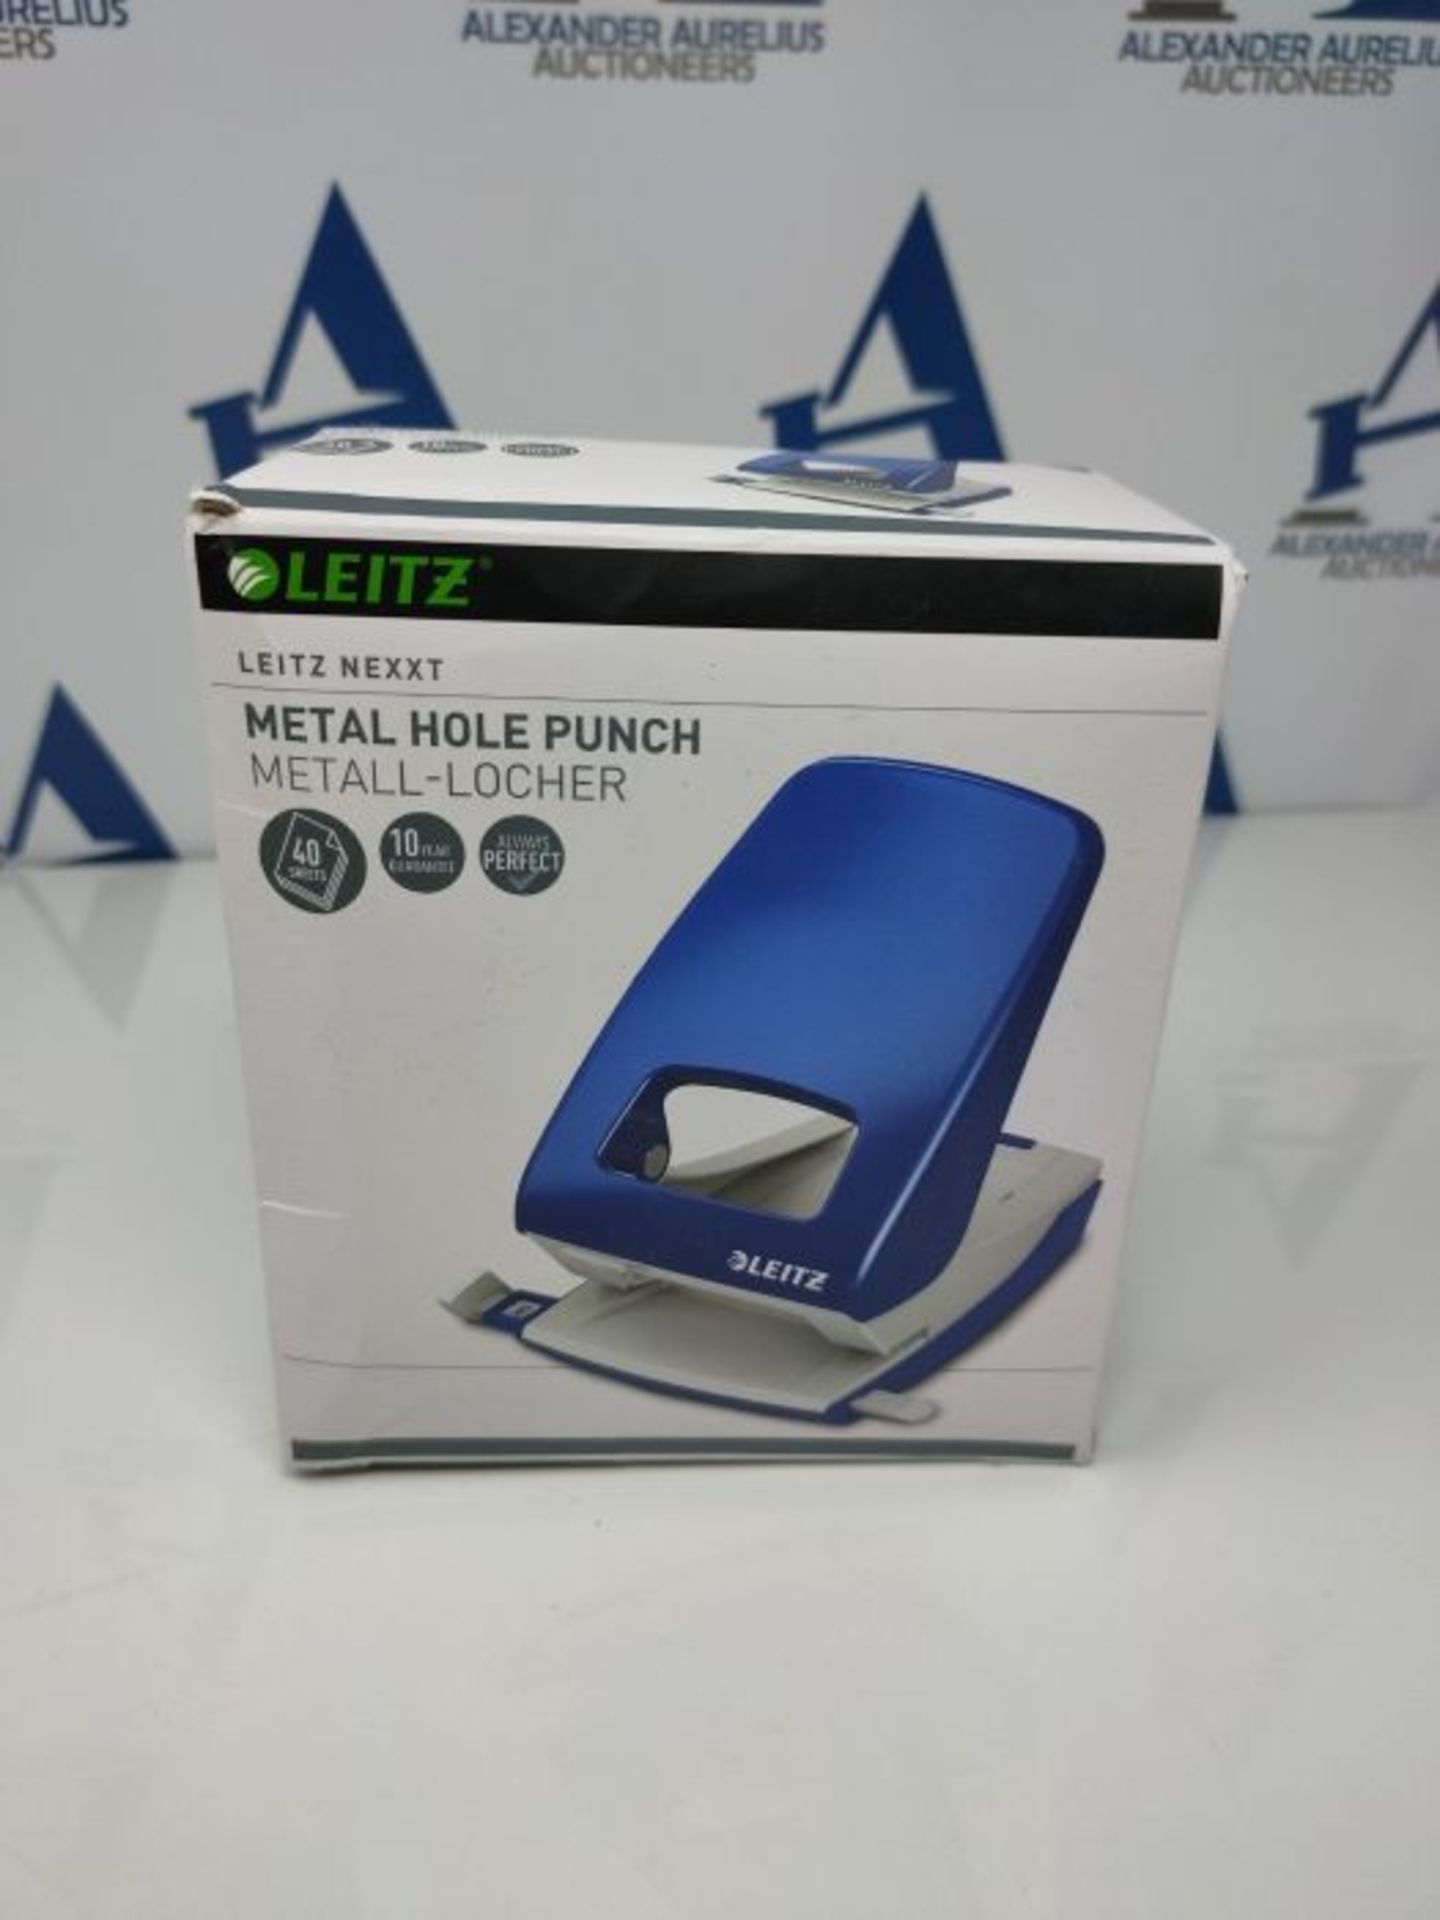 Leitz Hole Punch, 40 Sheets, Guide Bar with Format Markings, Metal, NeXXt Range, 51380 - Image 2 of 3